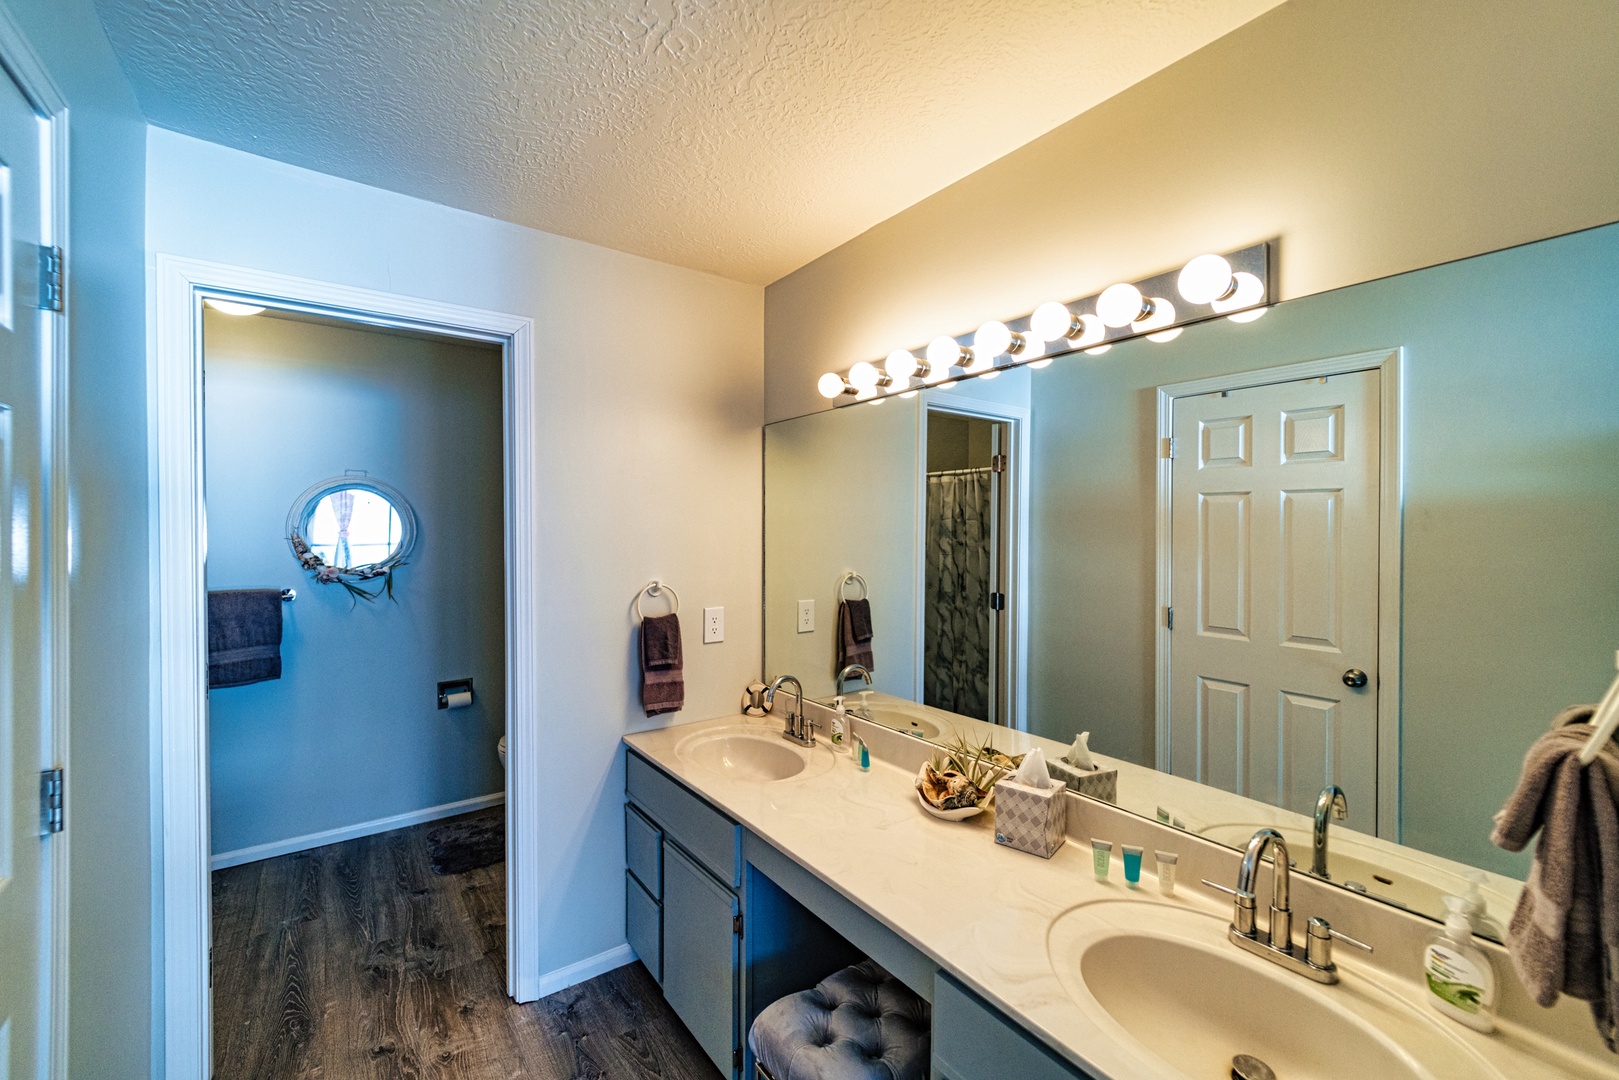 The queen ensuite includes a double vanity, shower/tub combo & closet